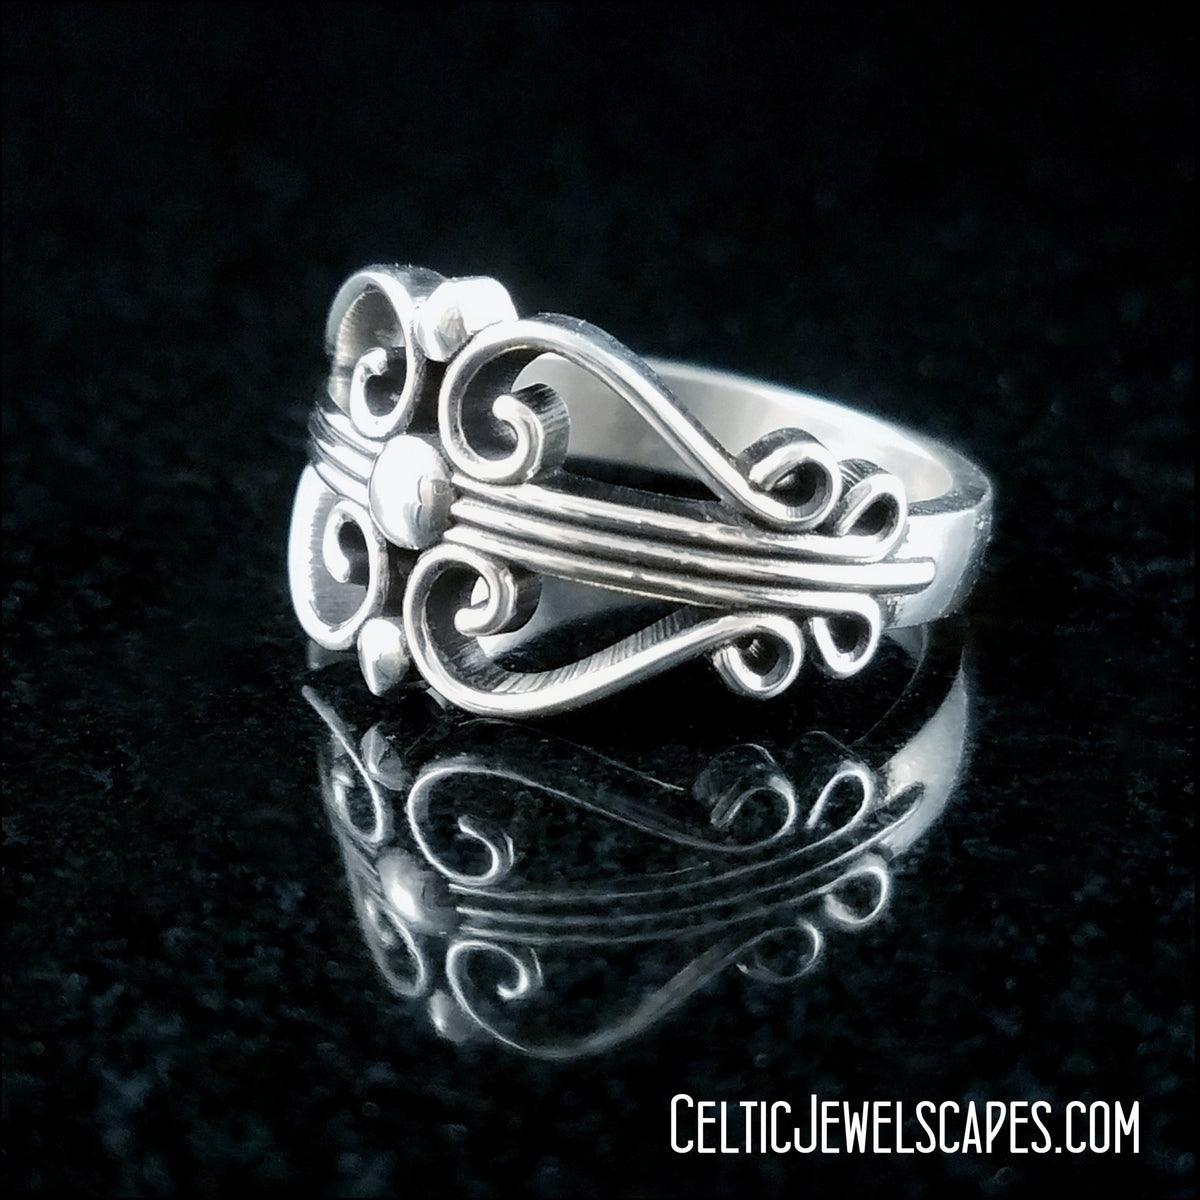 RIOS - Starting at $179 - Celtic Jewelscapes